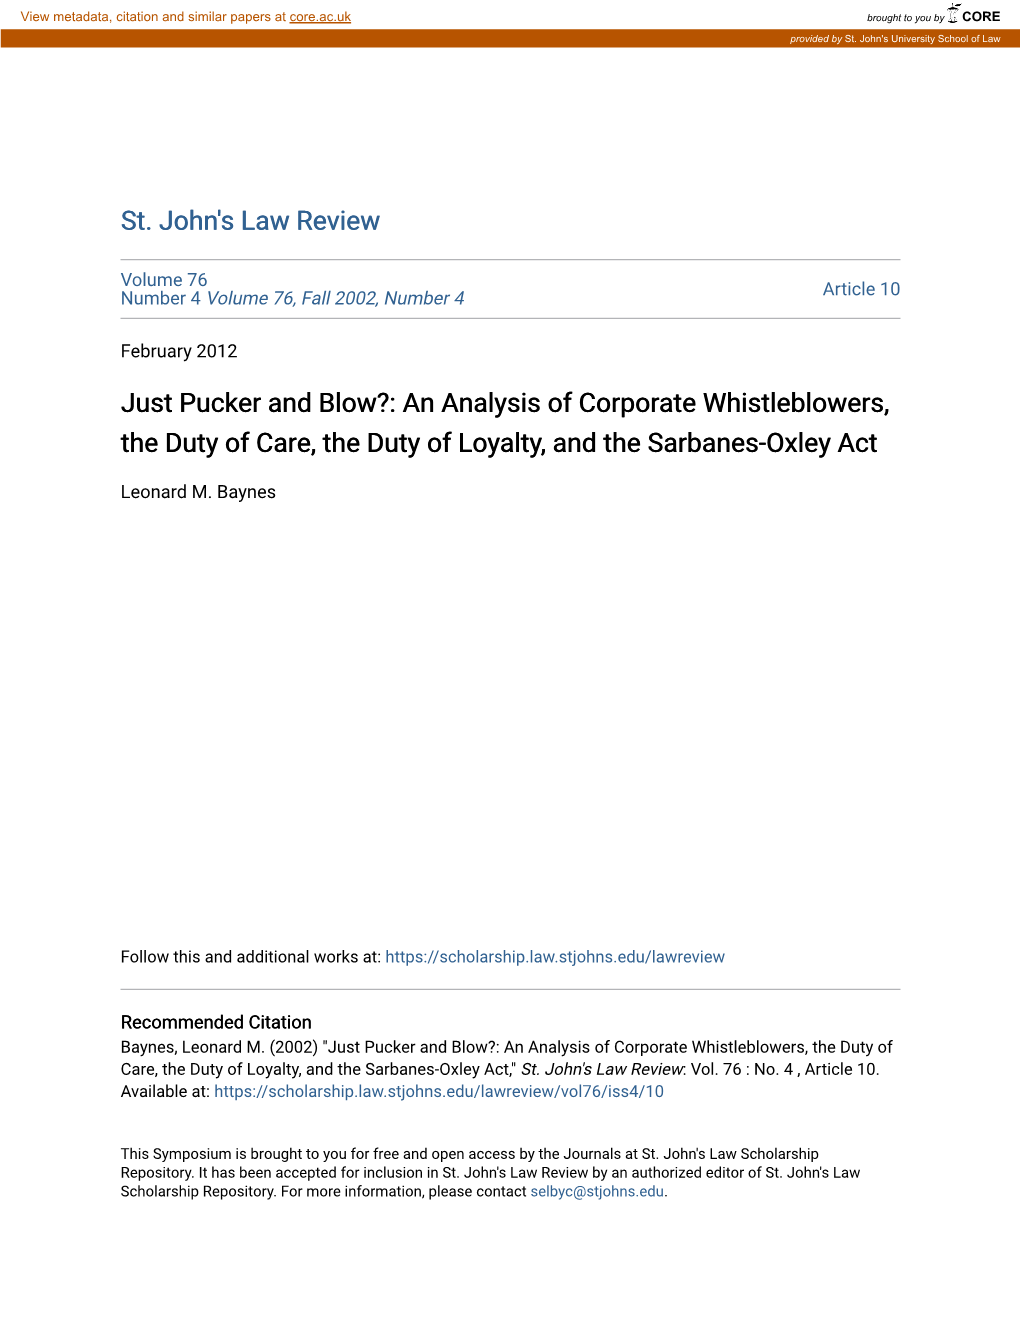 An Analysis of Corporate Whistleblowers, the Duty of Care, the Duty of Loyalty, and the Sarbanes-Oxley Act